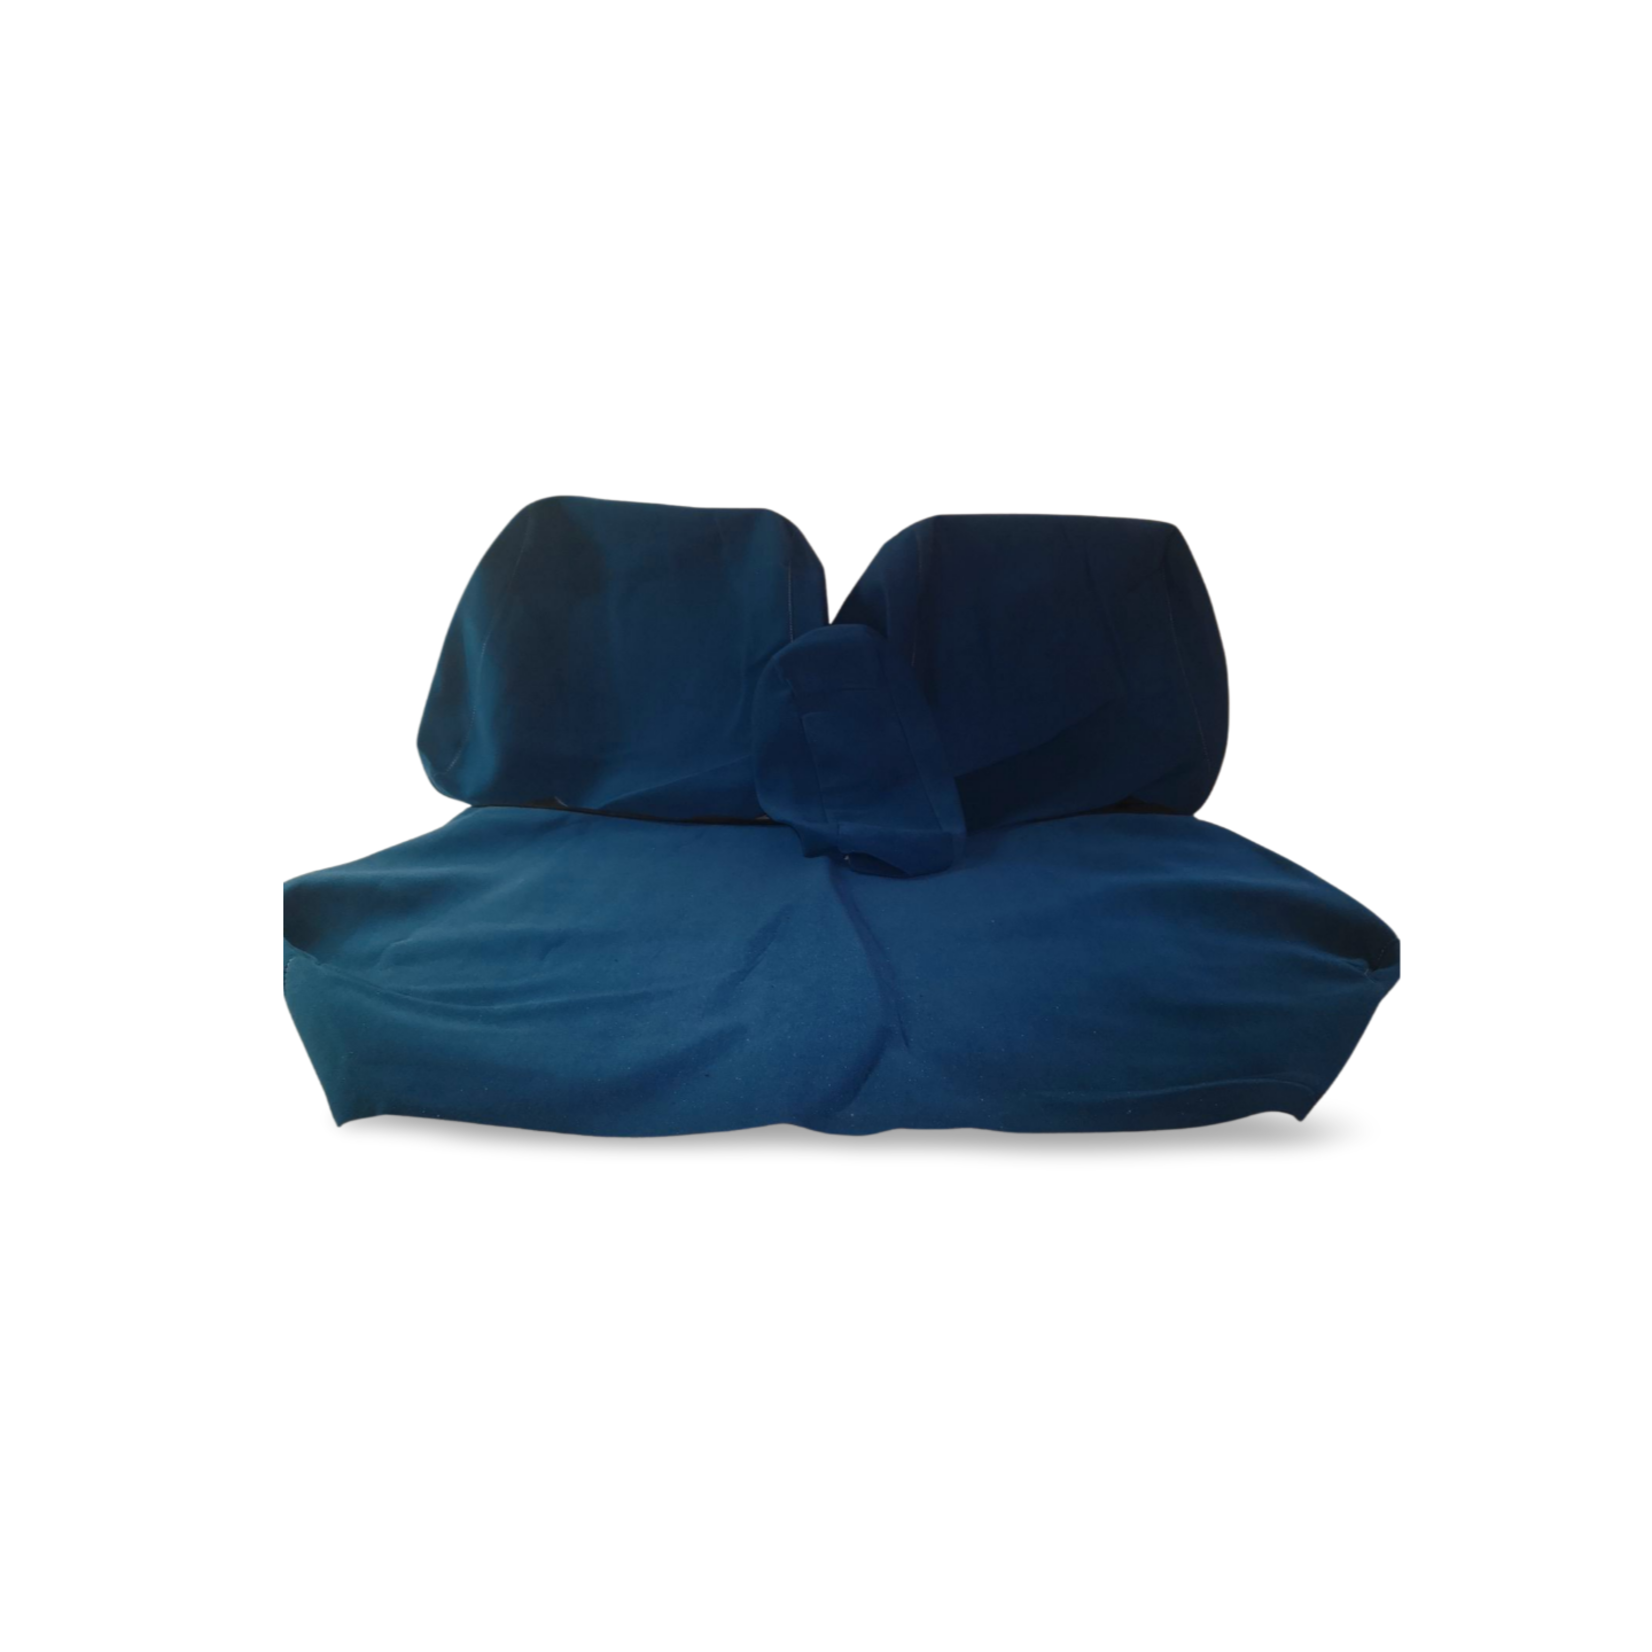 Upholstery set Jersey blue 63/73 (with armrest bench 20cm) non Pallas 09/62-07/69 Nr Org: Interior - Image 63/73